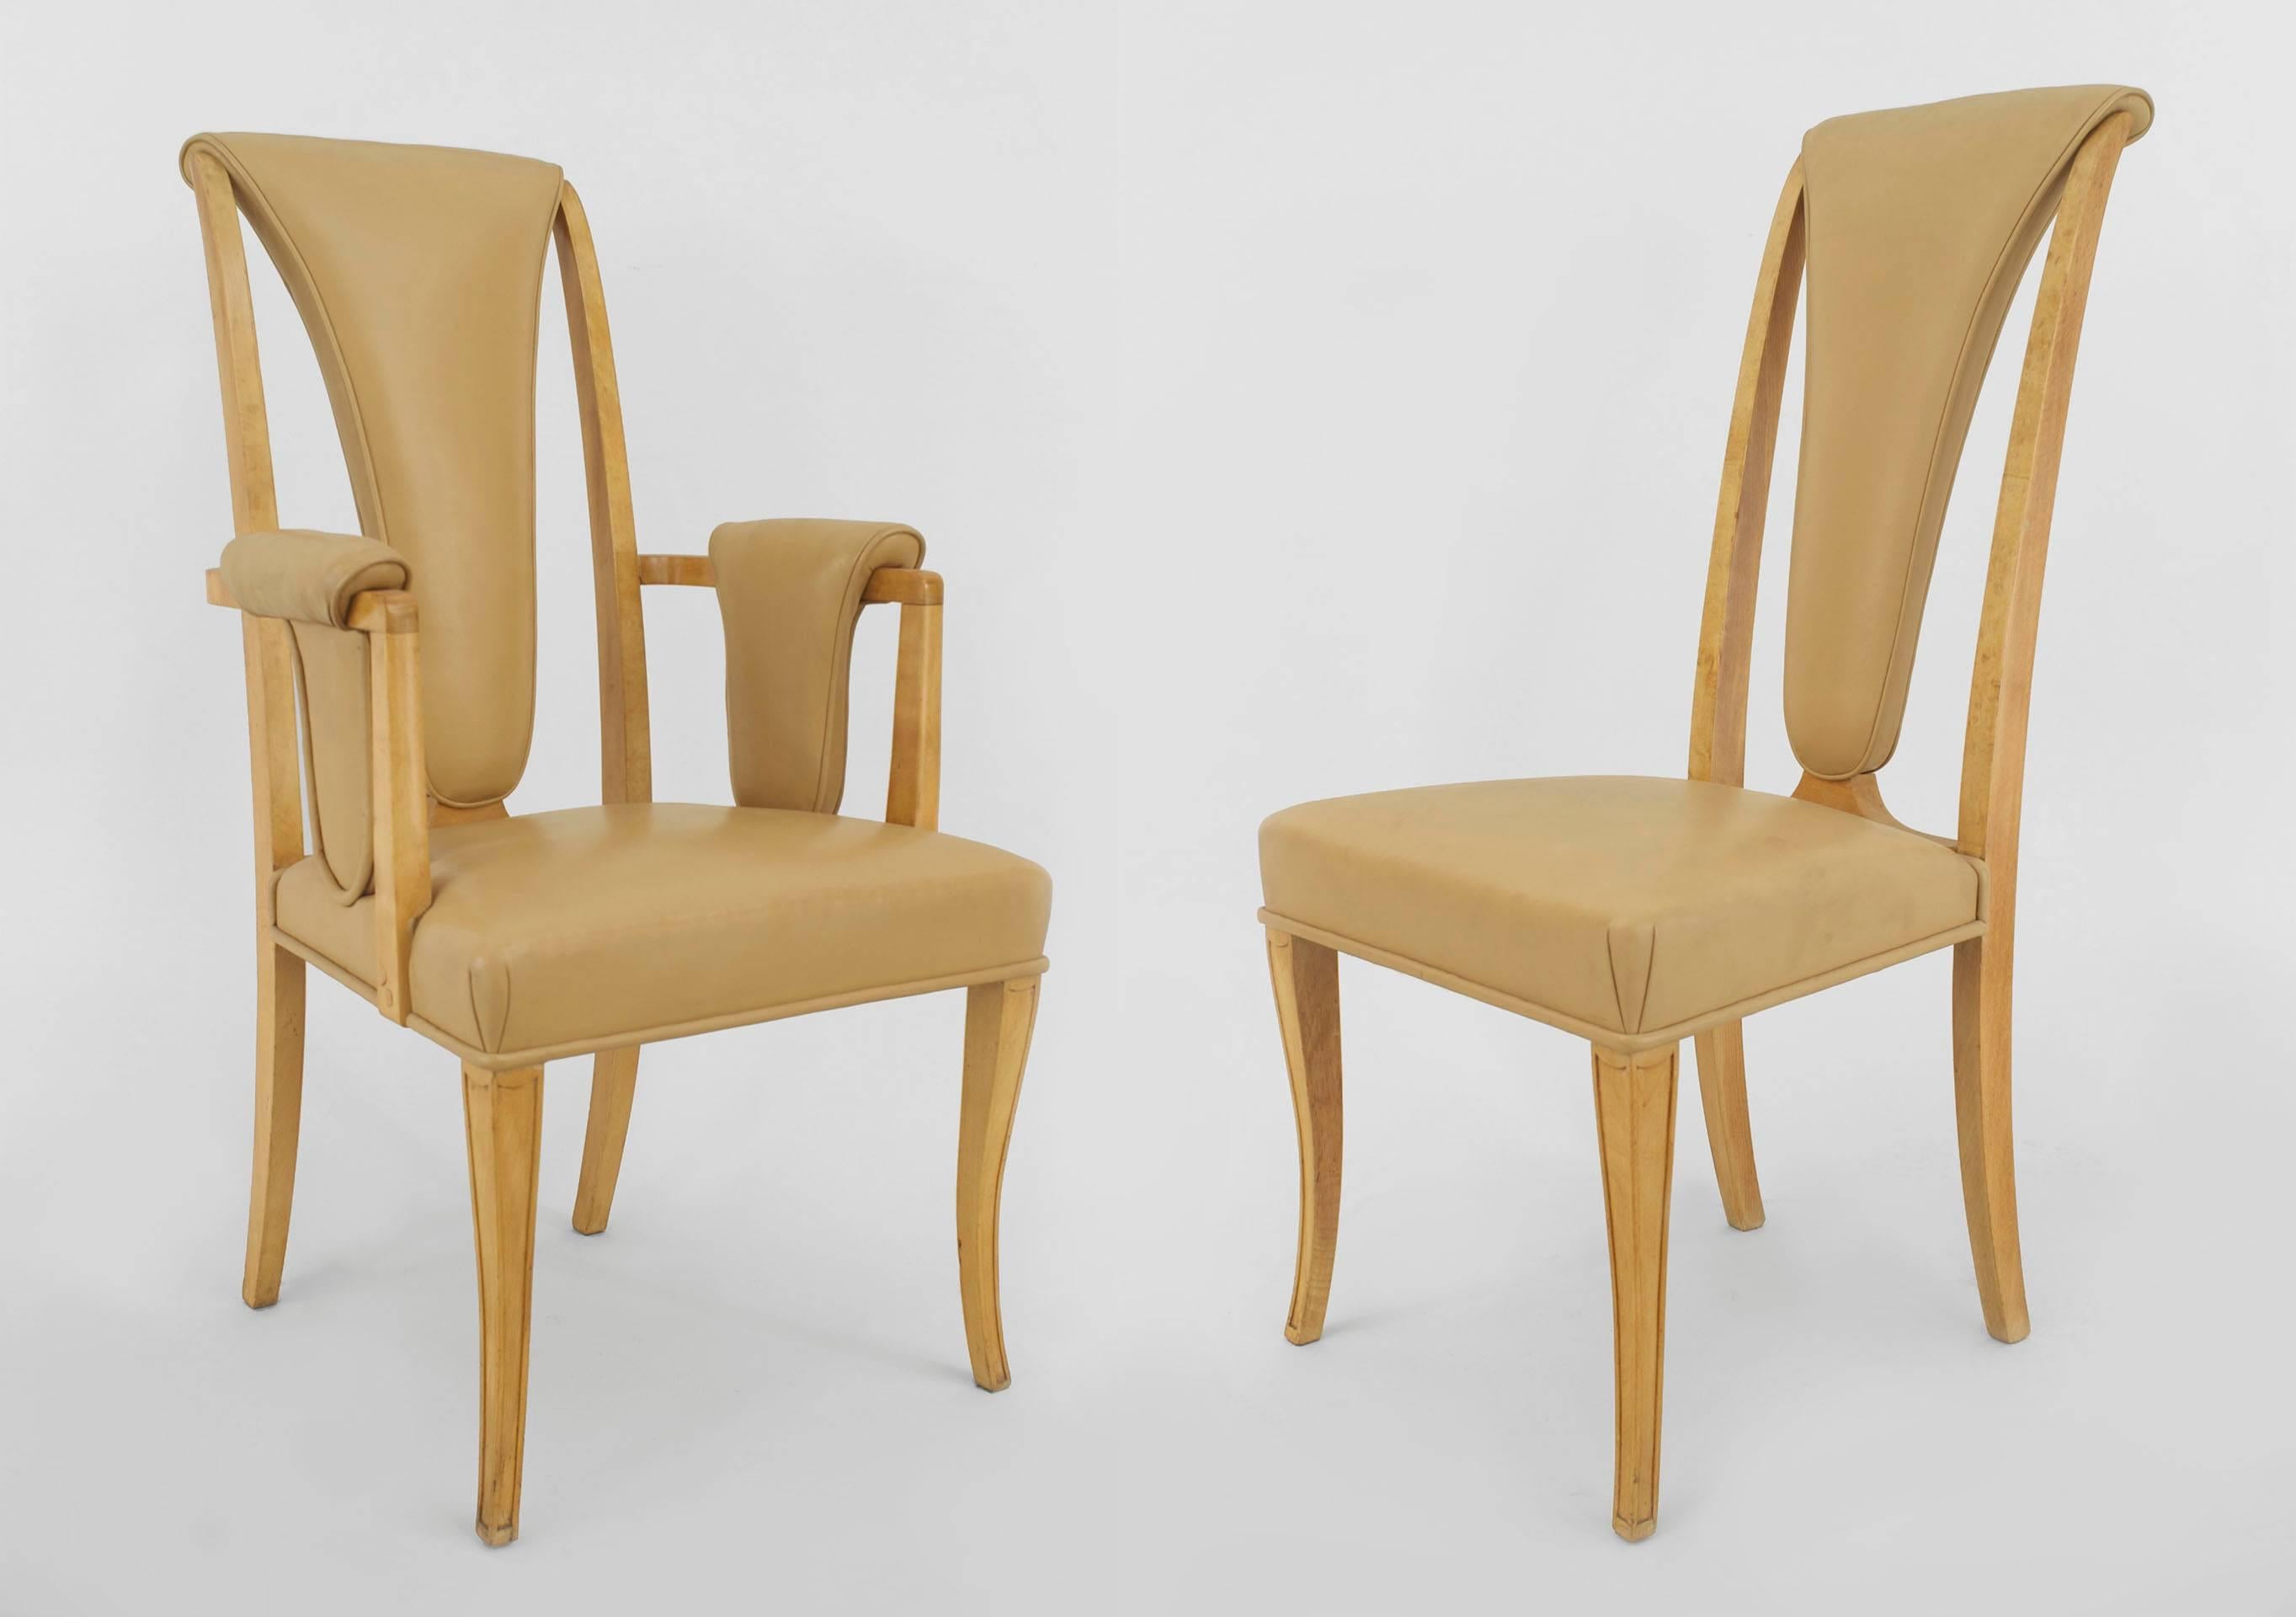 Set of 8 English Art Deco maple high back dining chairs with beige leather upholstery (2 arms:22¬Ω